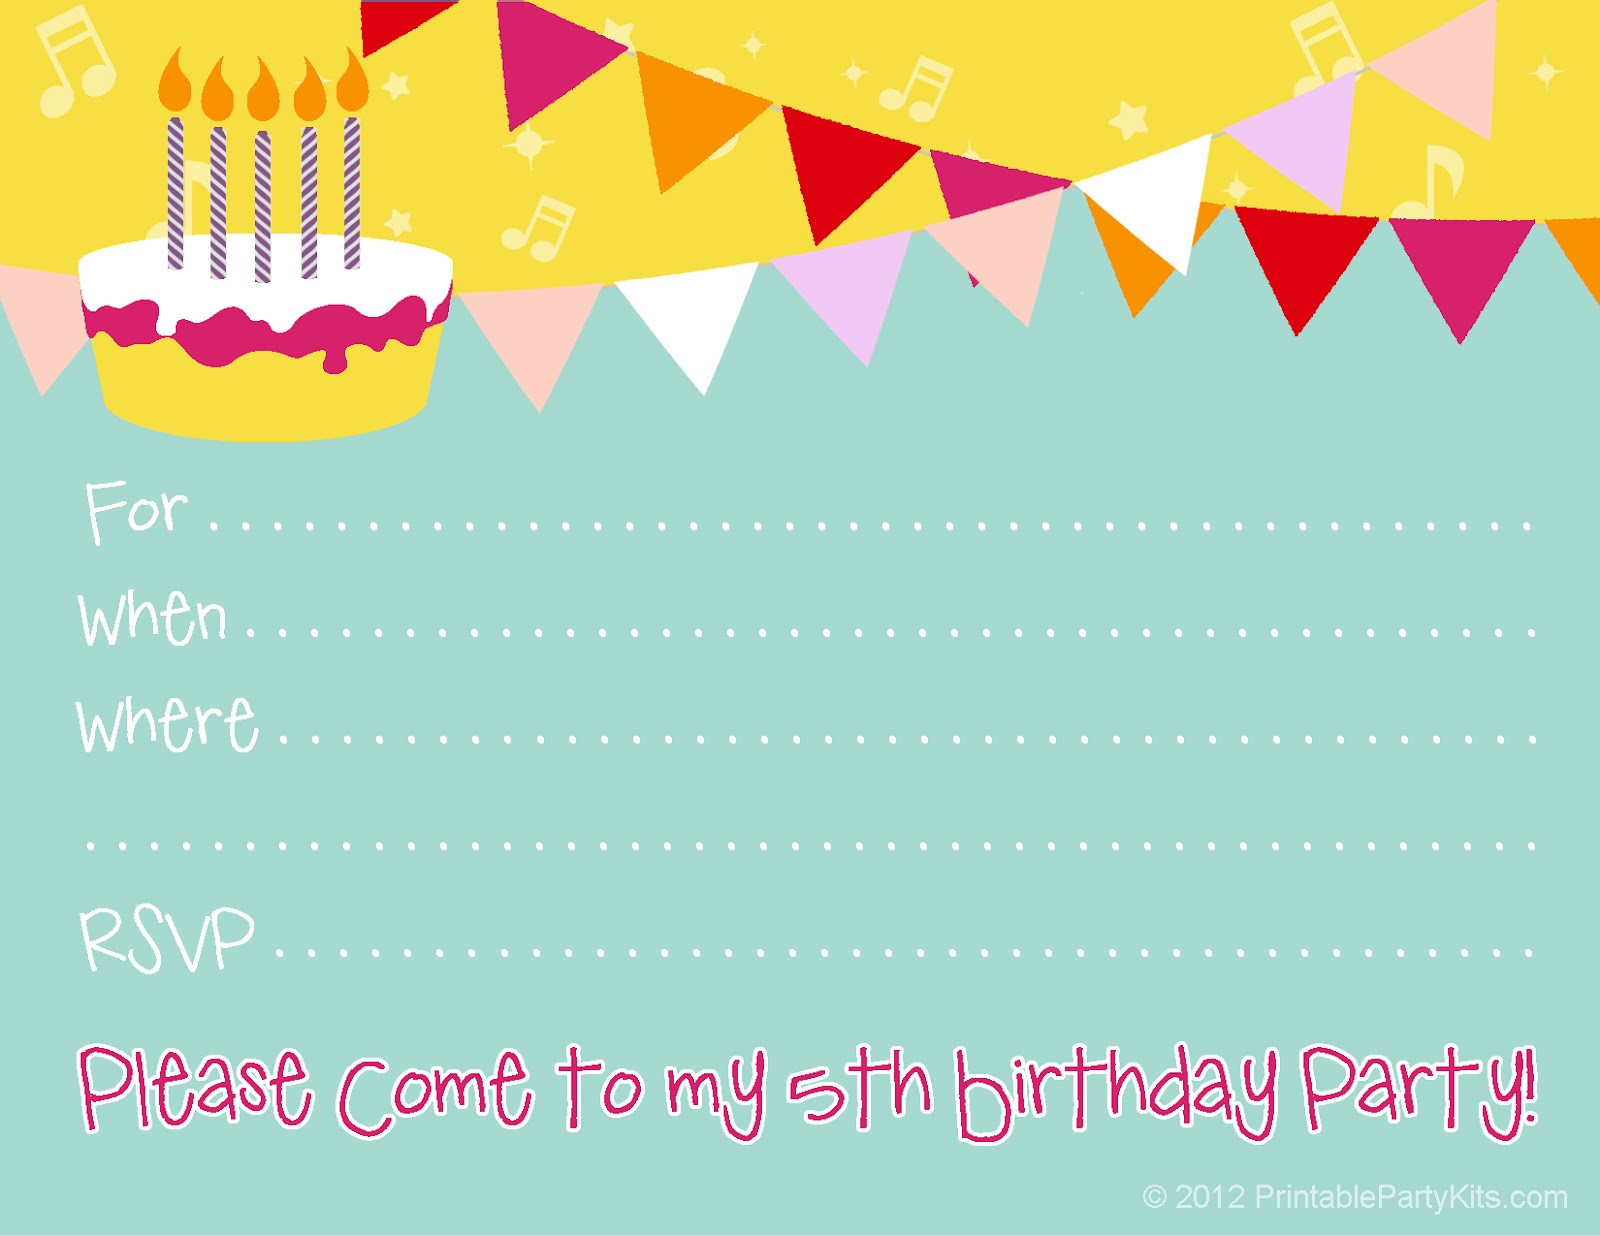 Birthday Party Cards
 Free Birthday Party Invitations for Girl – FREE Printable